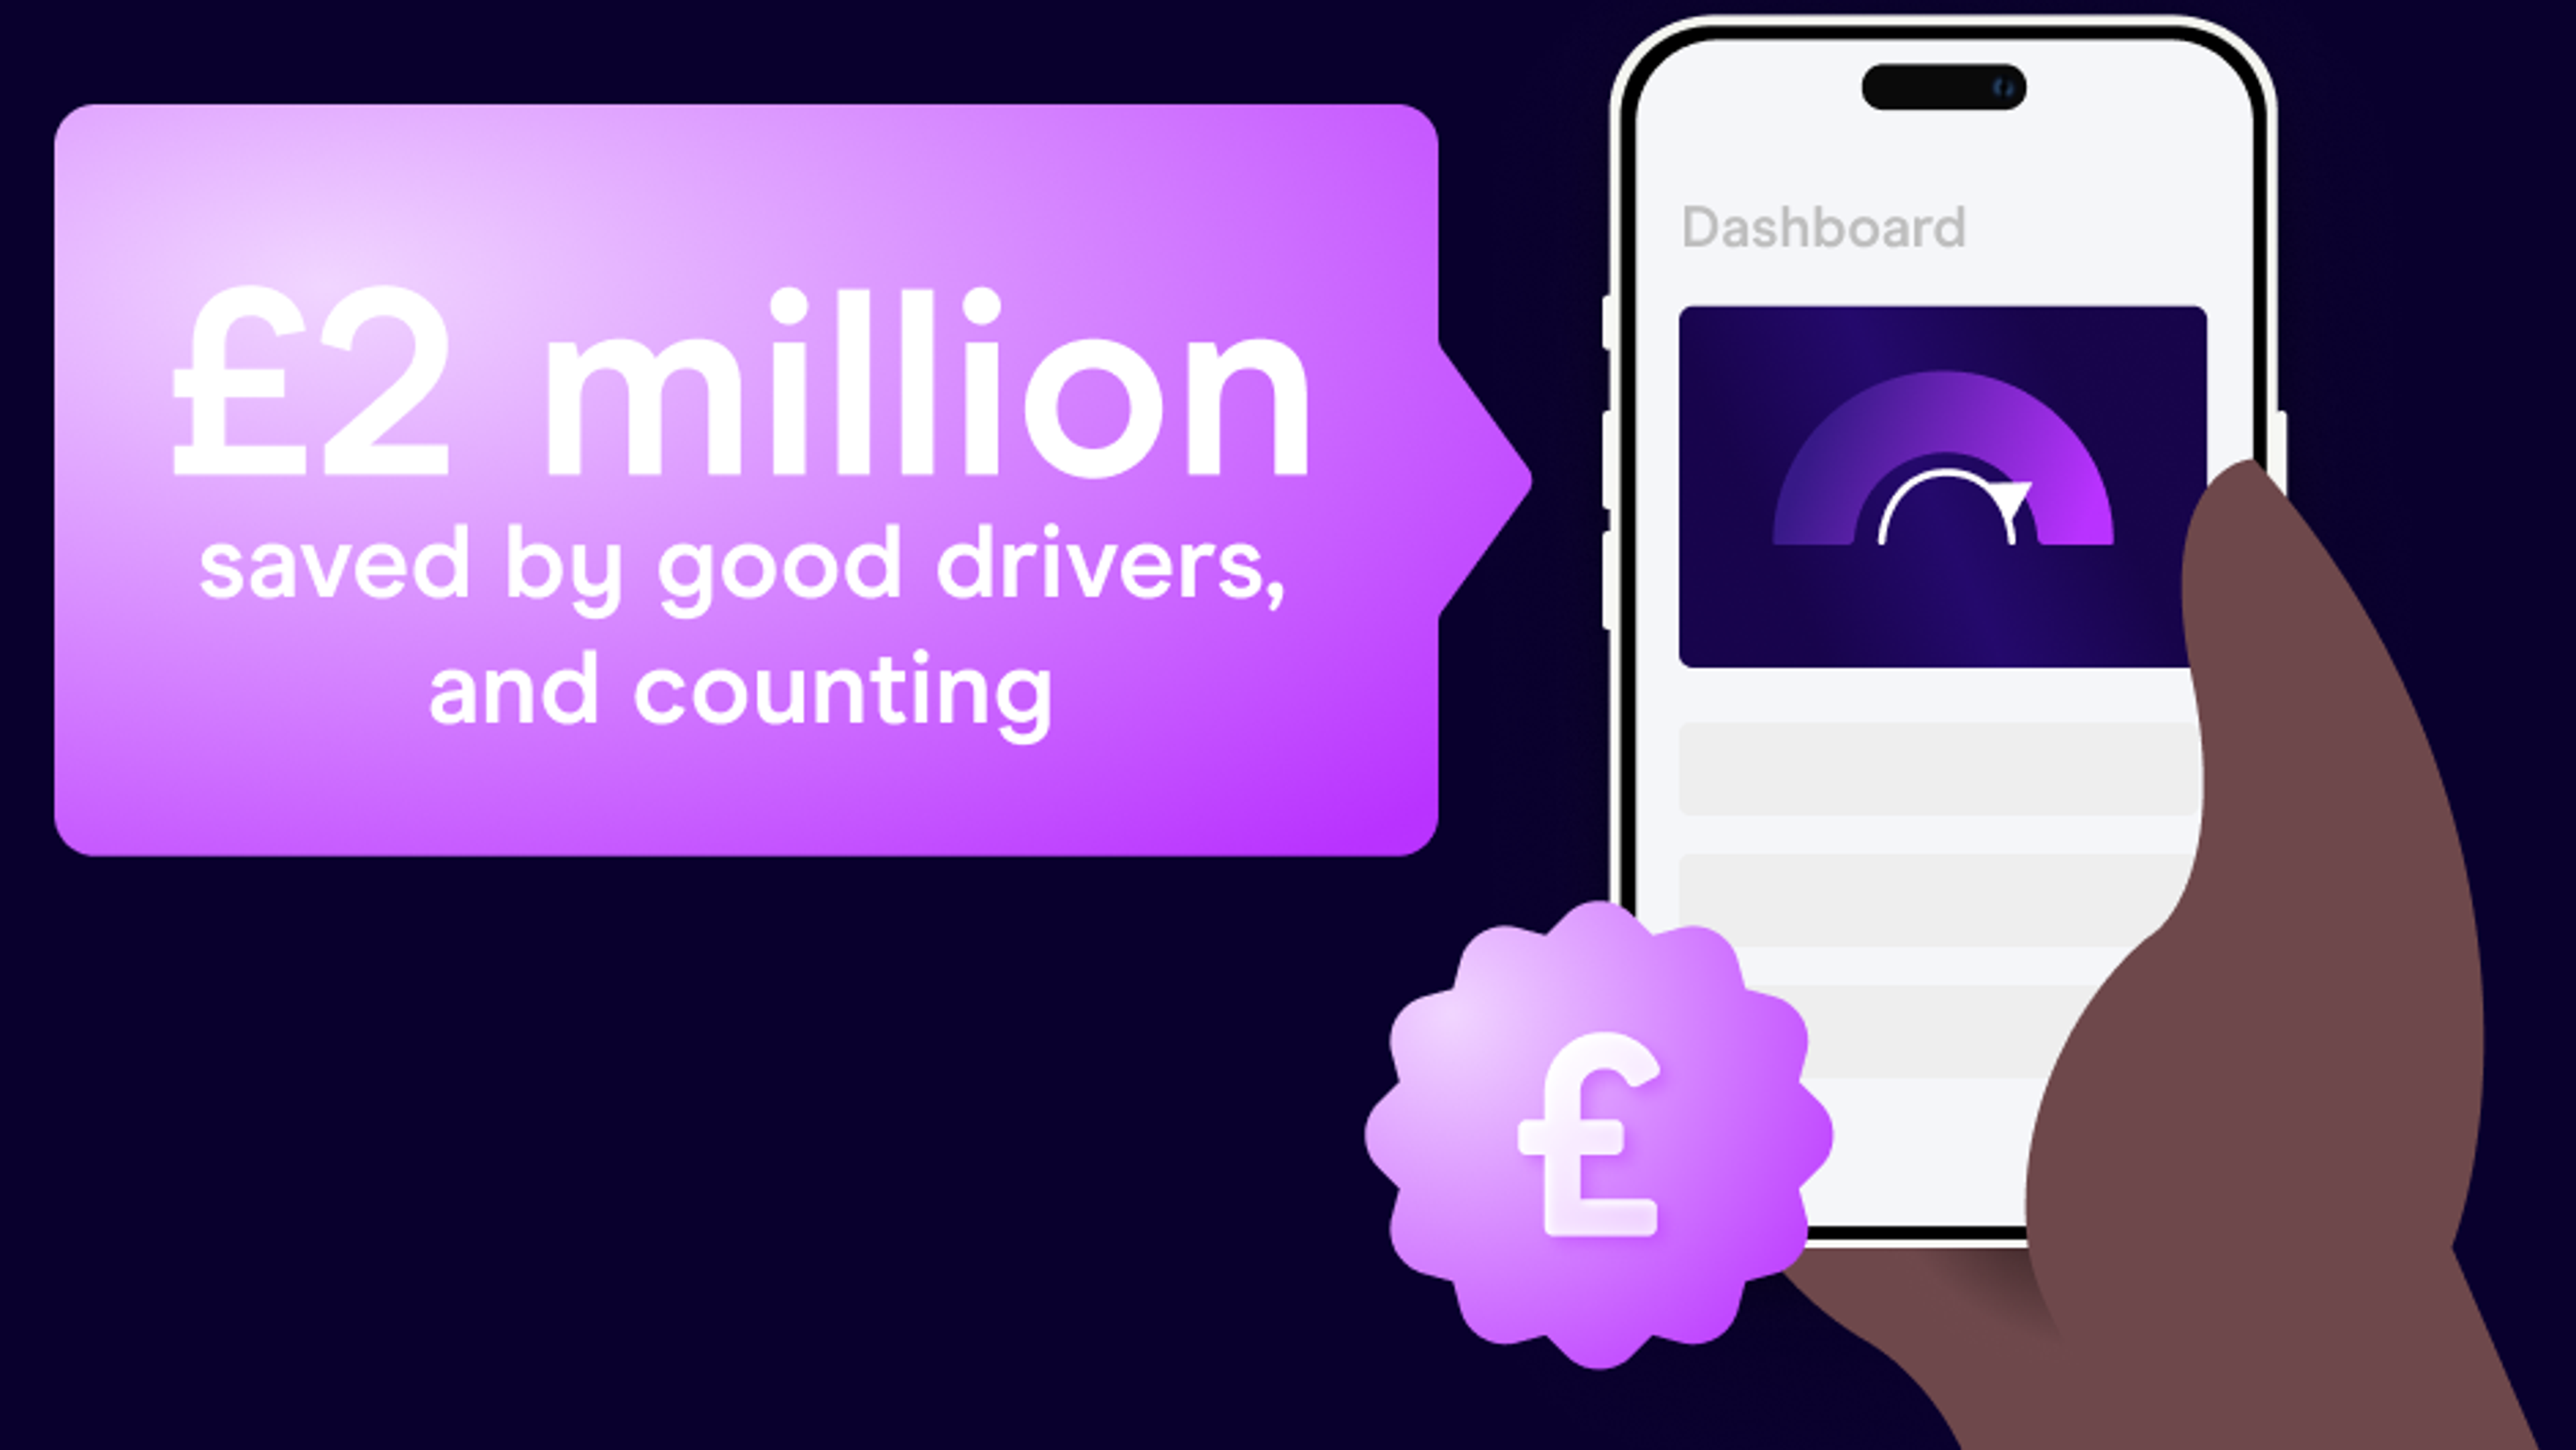 Illustrated hand holding a phone with Zego Sense driver score with a callout stating '£2million saved by good drivers, and counting'